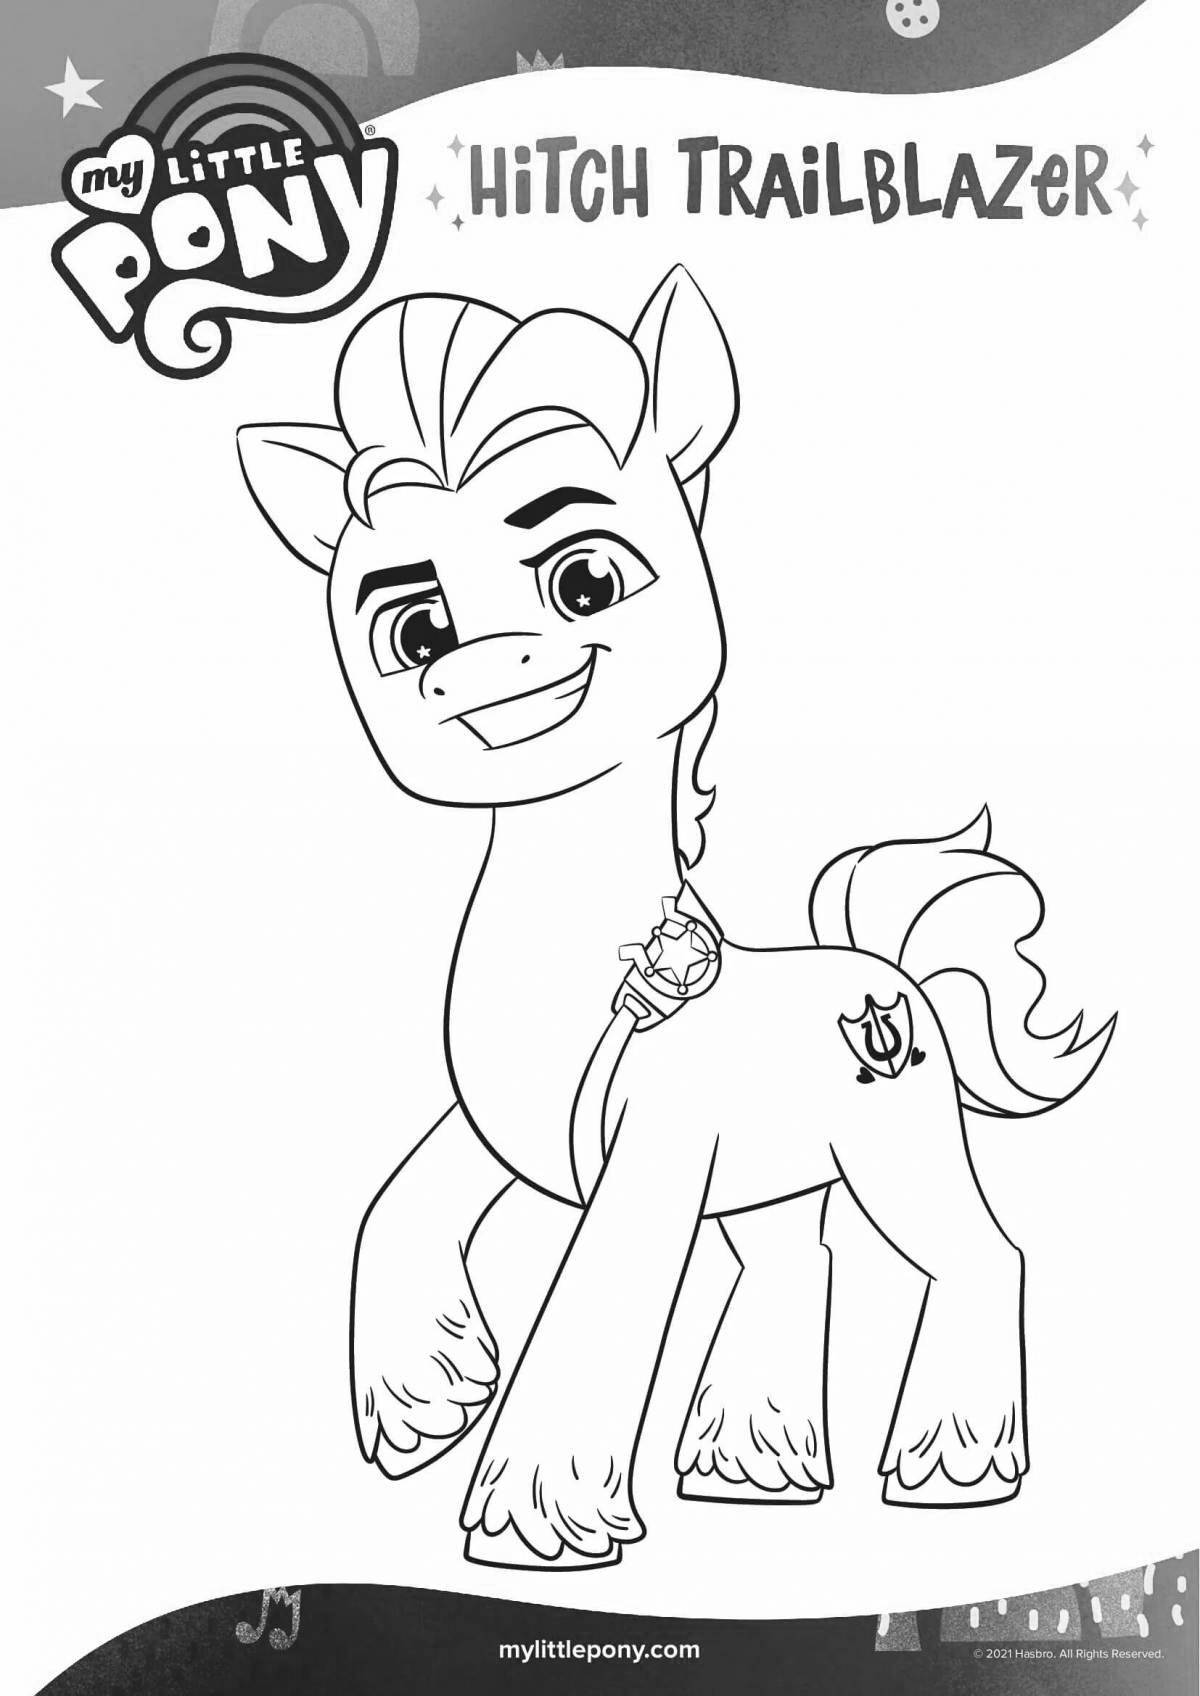 Coloring page funny pony sanny